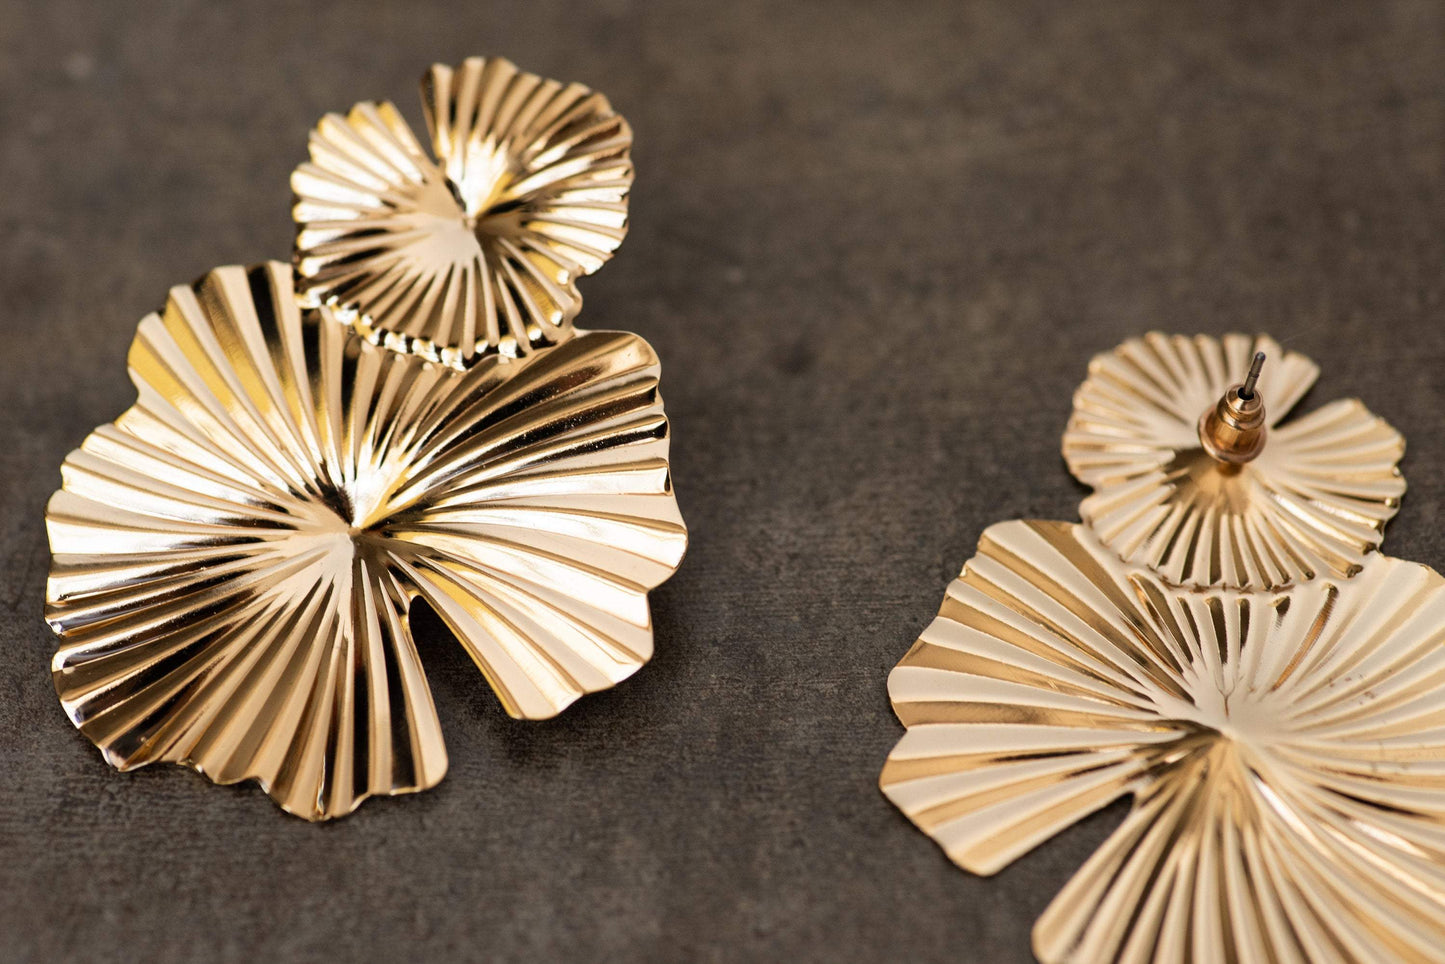 Gold Oversized Abstract Floral Earrings - Closed Caption | Shop Vintage + Handmade. Always Sustainable. Never Wasteful.